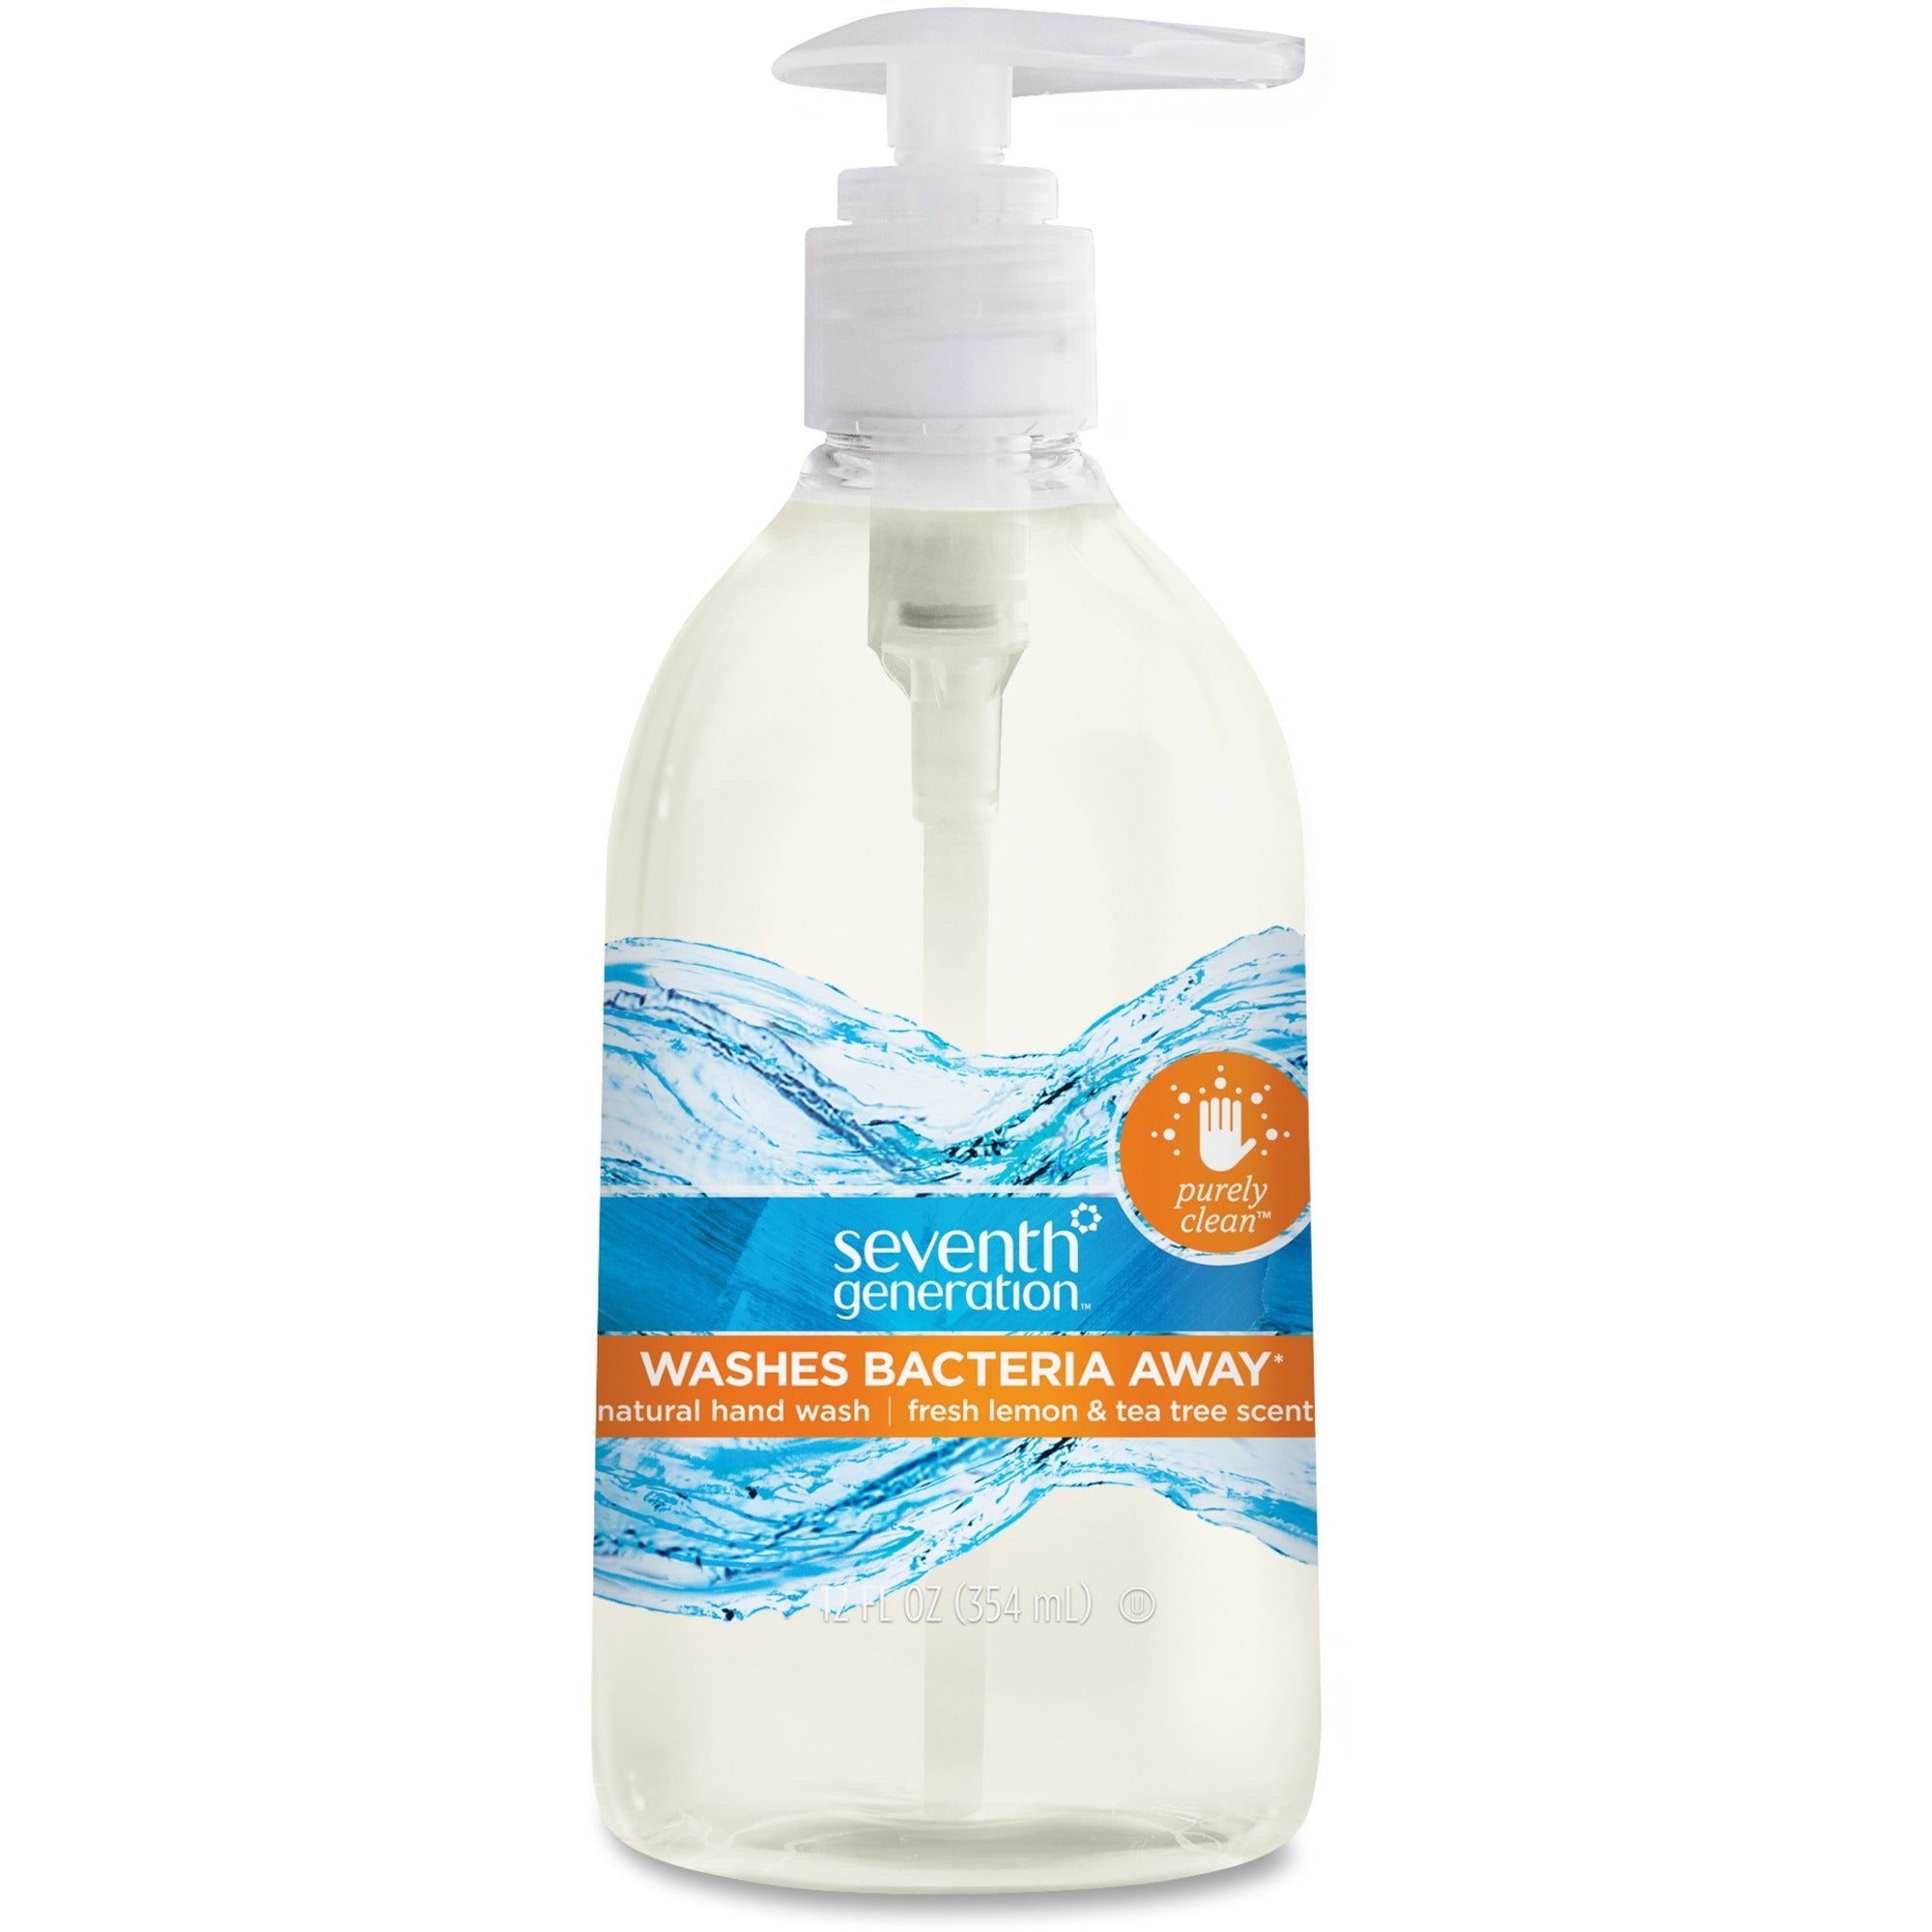 seventh-generation-purely-clean-hand-wash_sev22924ct - 1